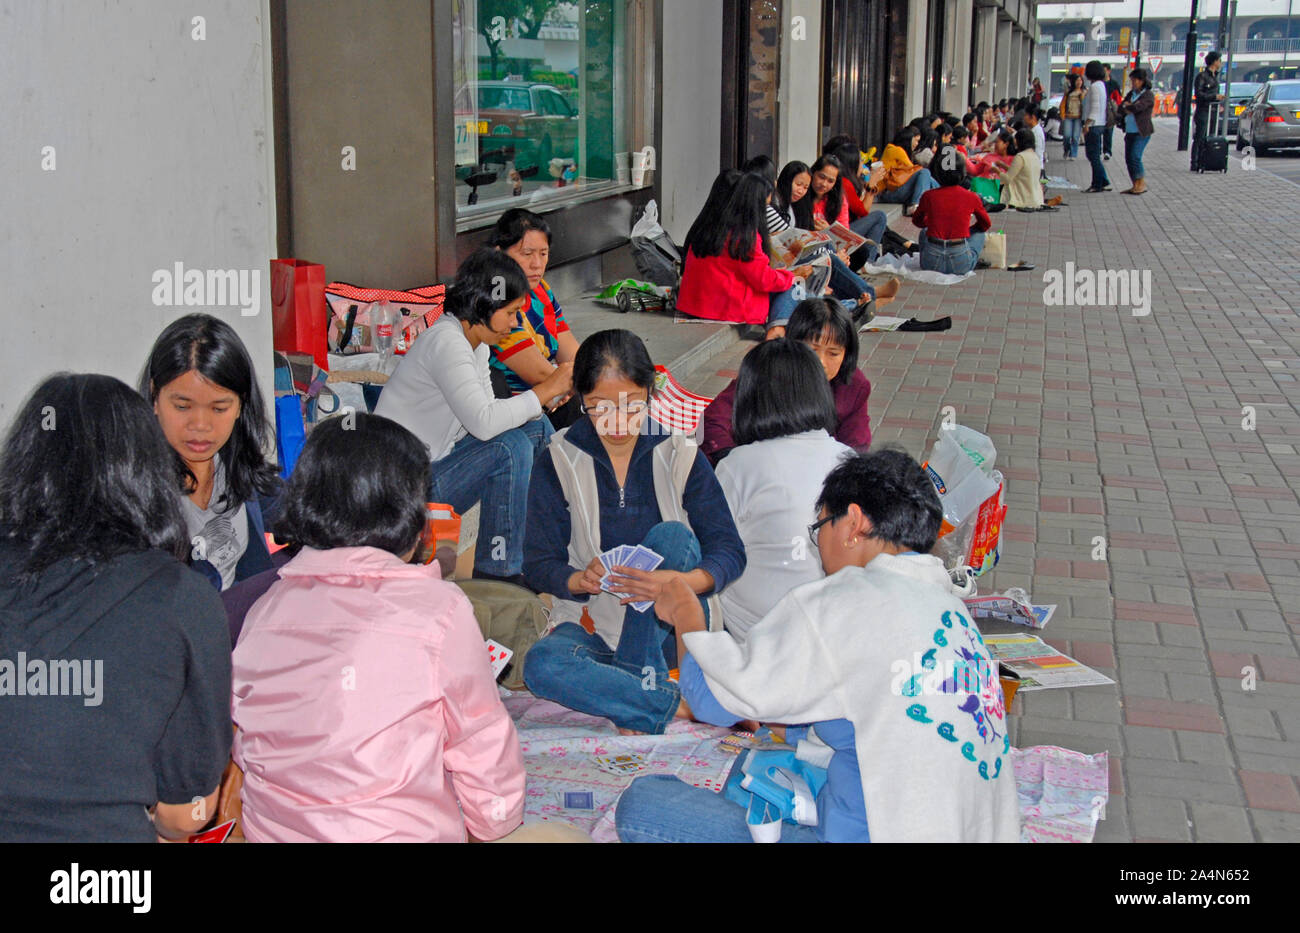 immigrant laborer women playing card in street, Hong Kong island, China Stock Photo